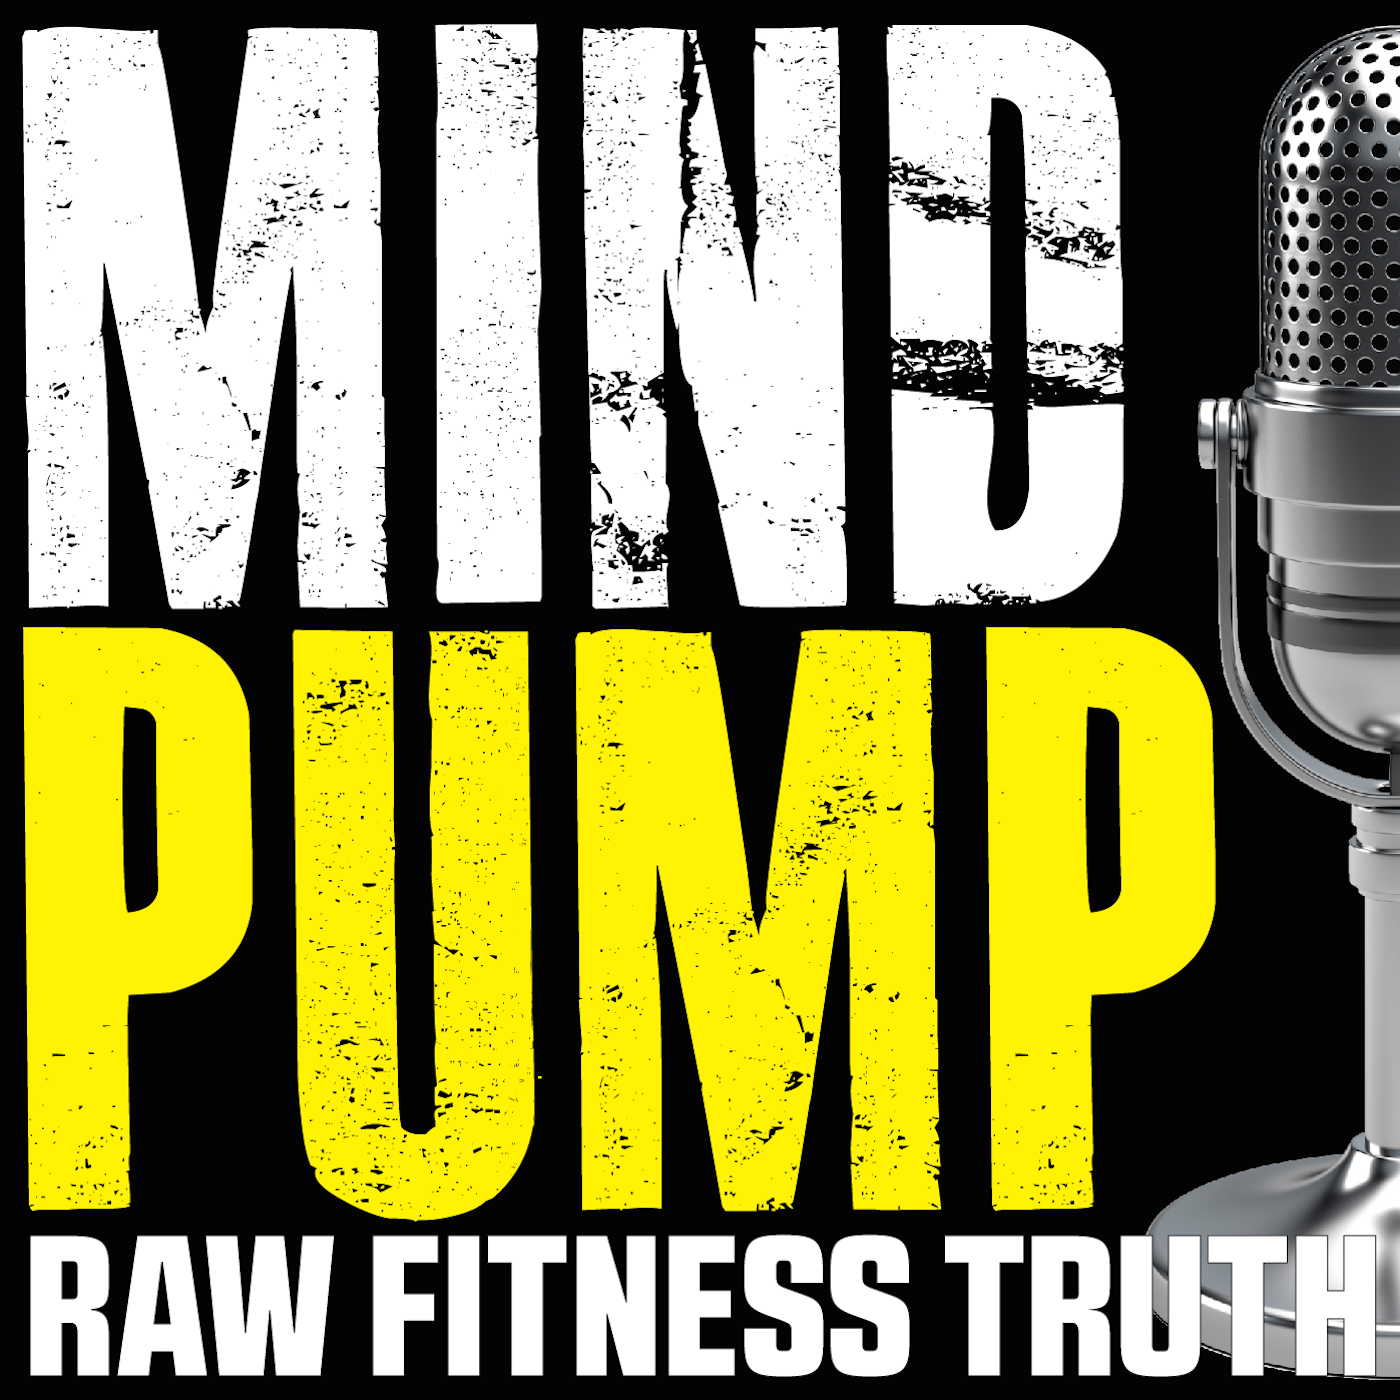 016: Alternative Medicine, Carbs, Muscle Memory, Overtraining & More